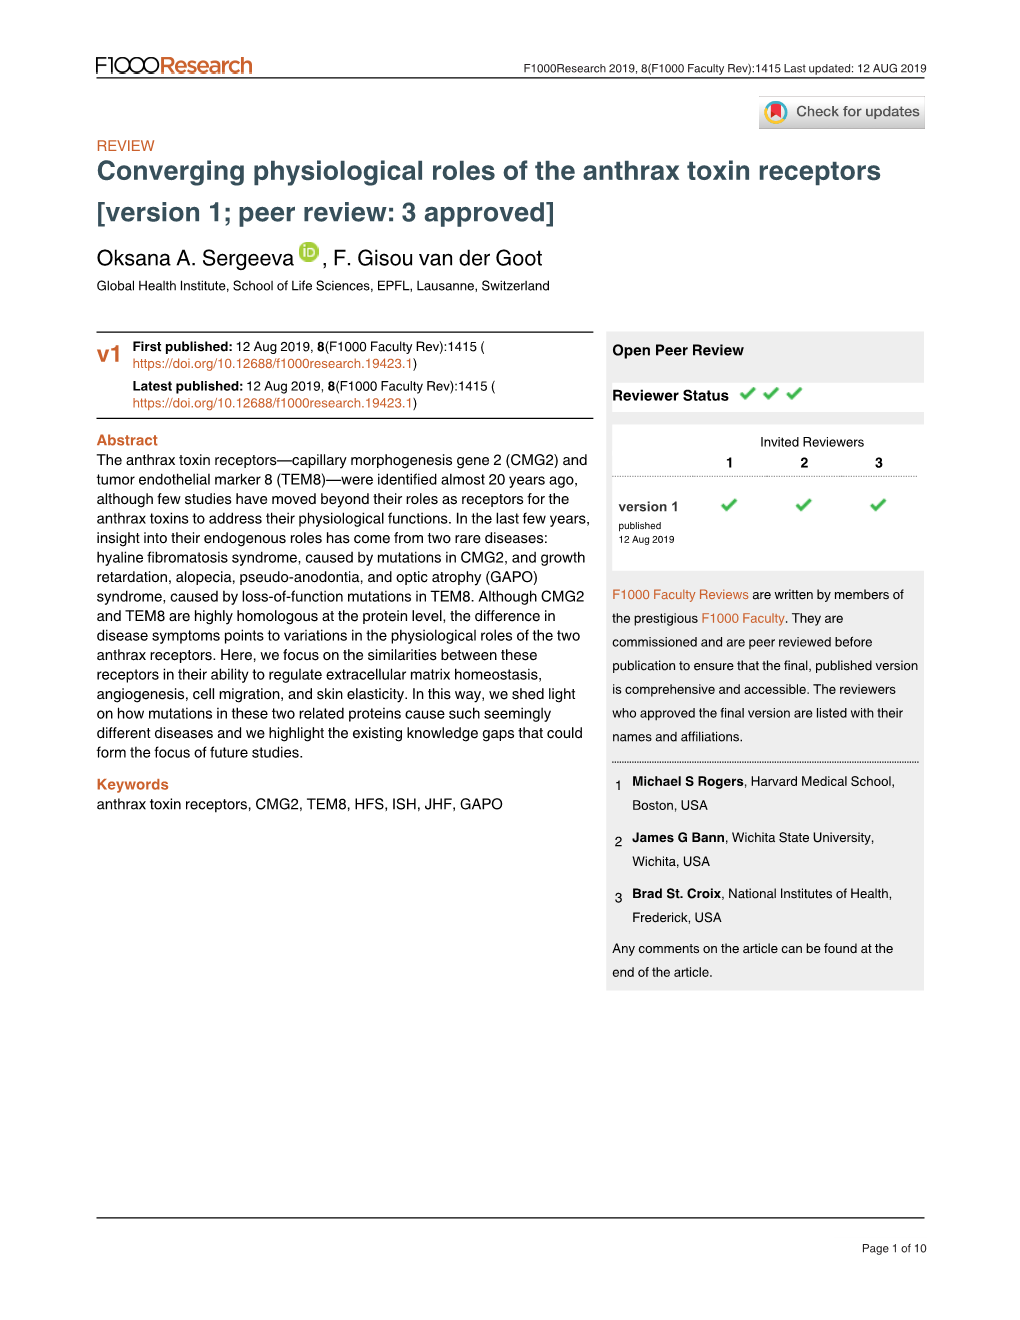 Converging Physiological Roles of the Anthrax Toxin Receptors [Version 1; Peer Review: 3 Approved] Oksana A